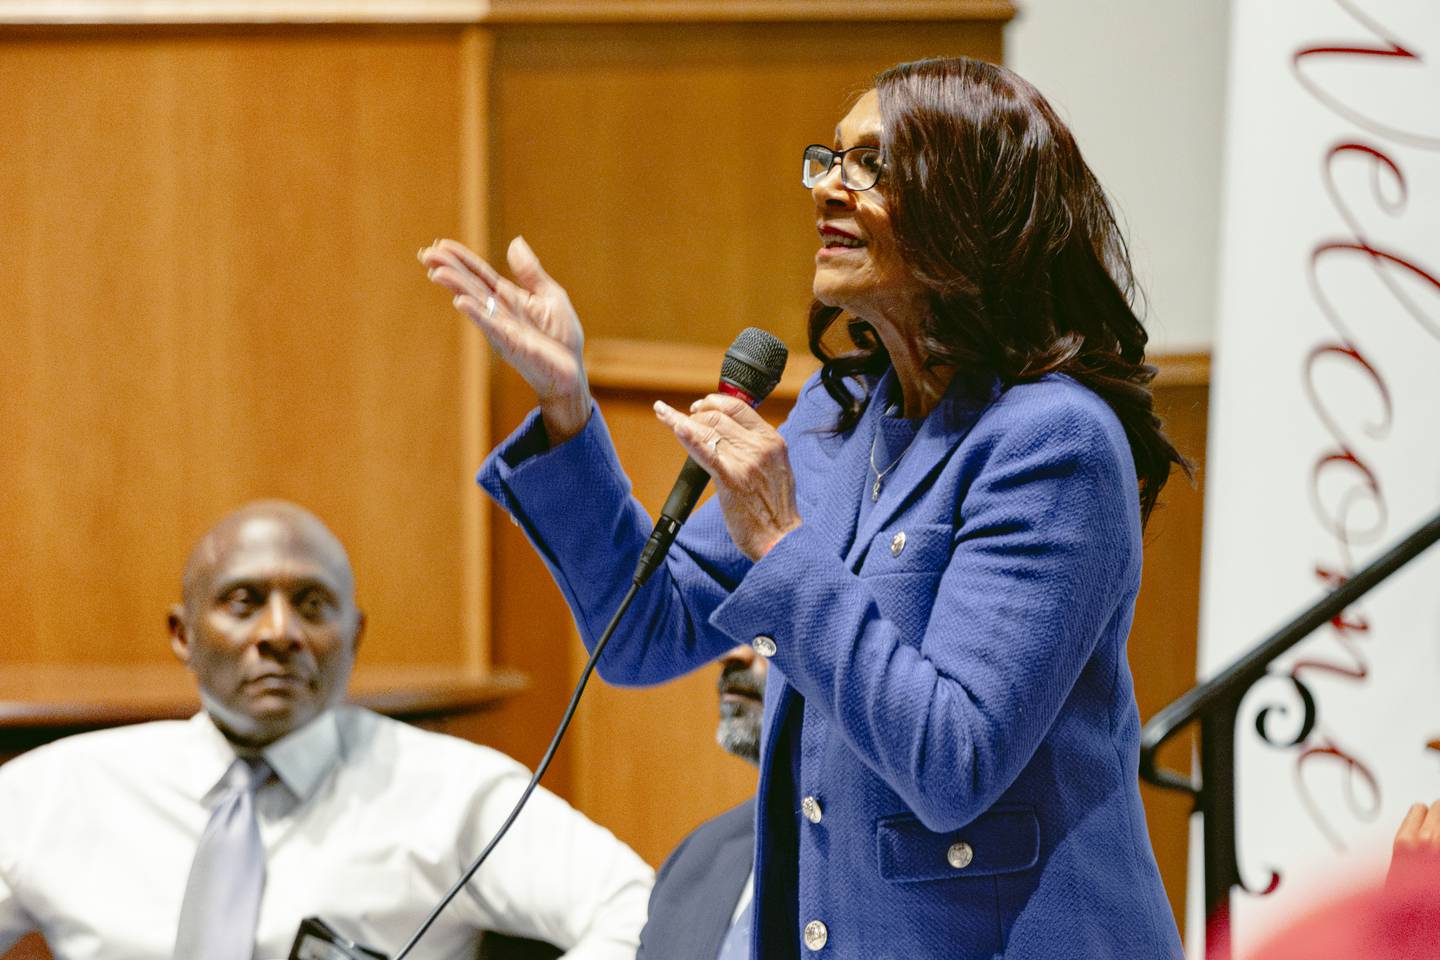 Mayoral candidate Sheila Dixon speaks to the packed crowd at the mayoral debates held at Roland Park Presbyterian Church on March 4, 2024 in Baltimore.